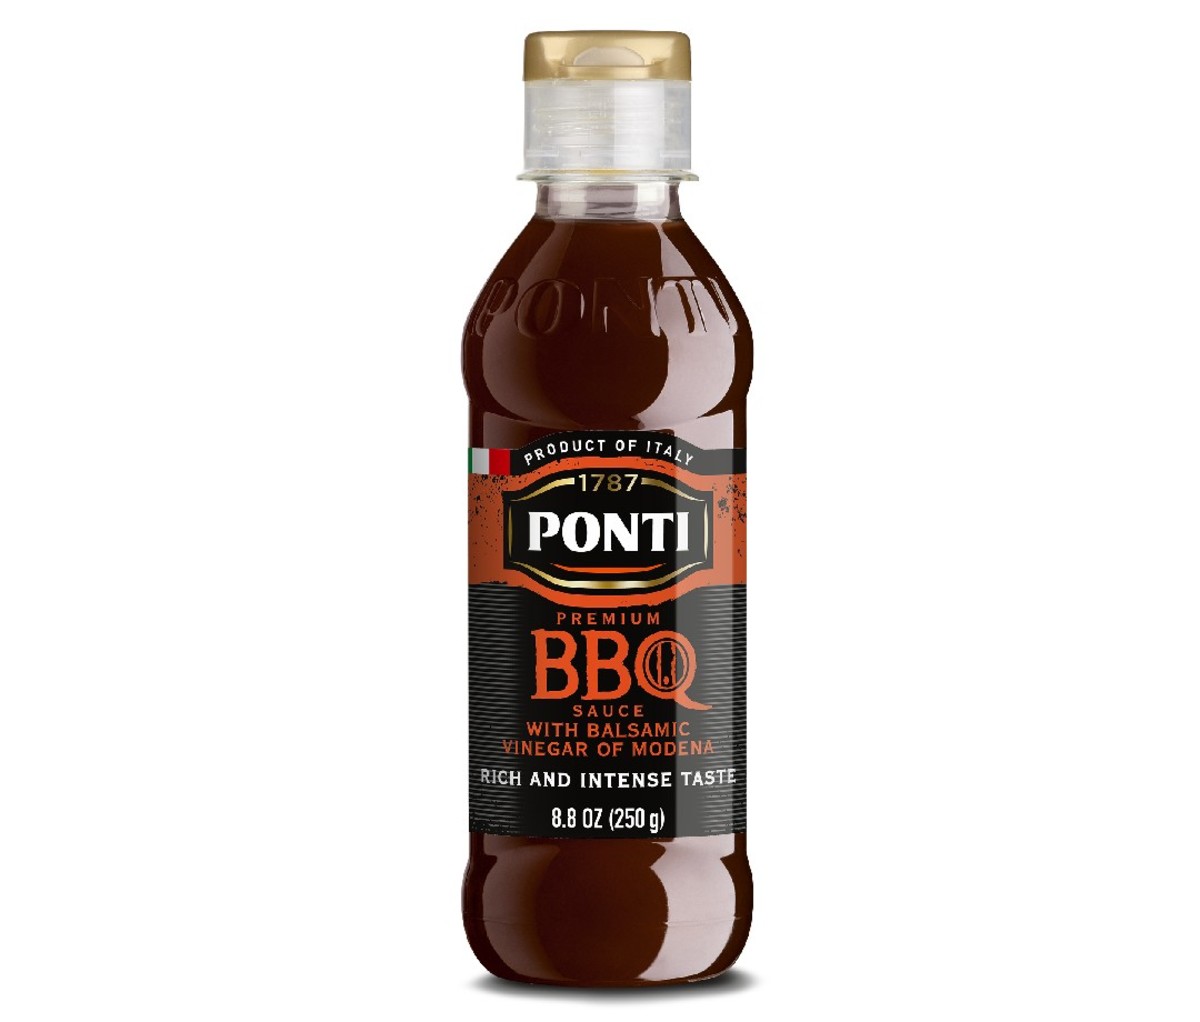 Bottle of Ponti BBQ Sauce with Balsamic Vinegar of Modena